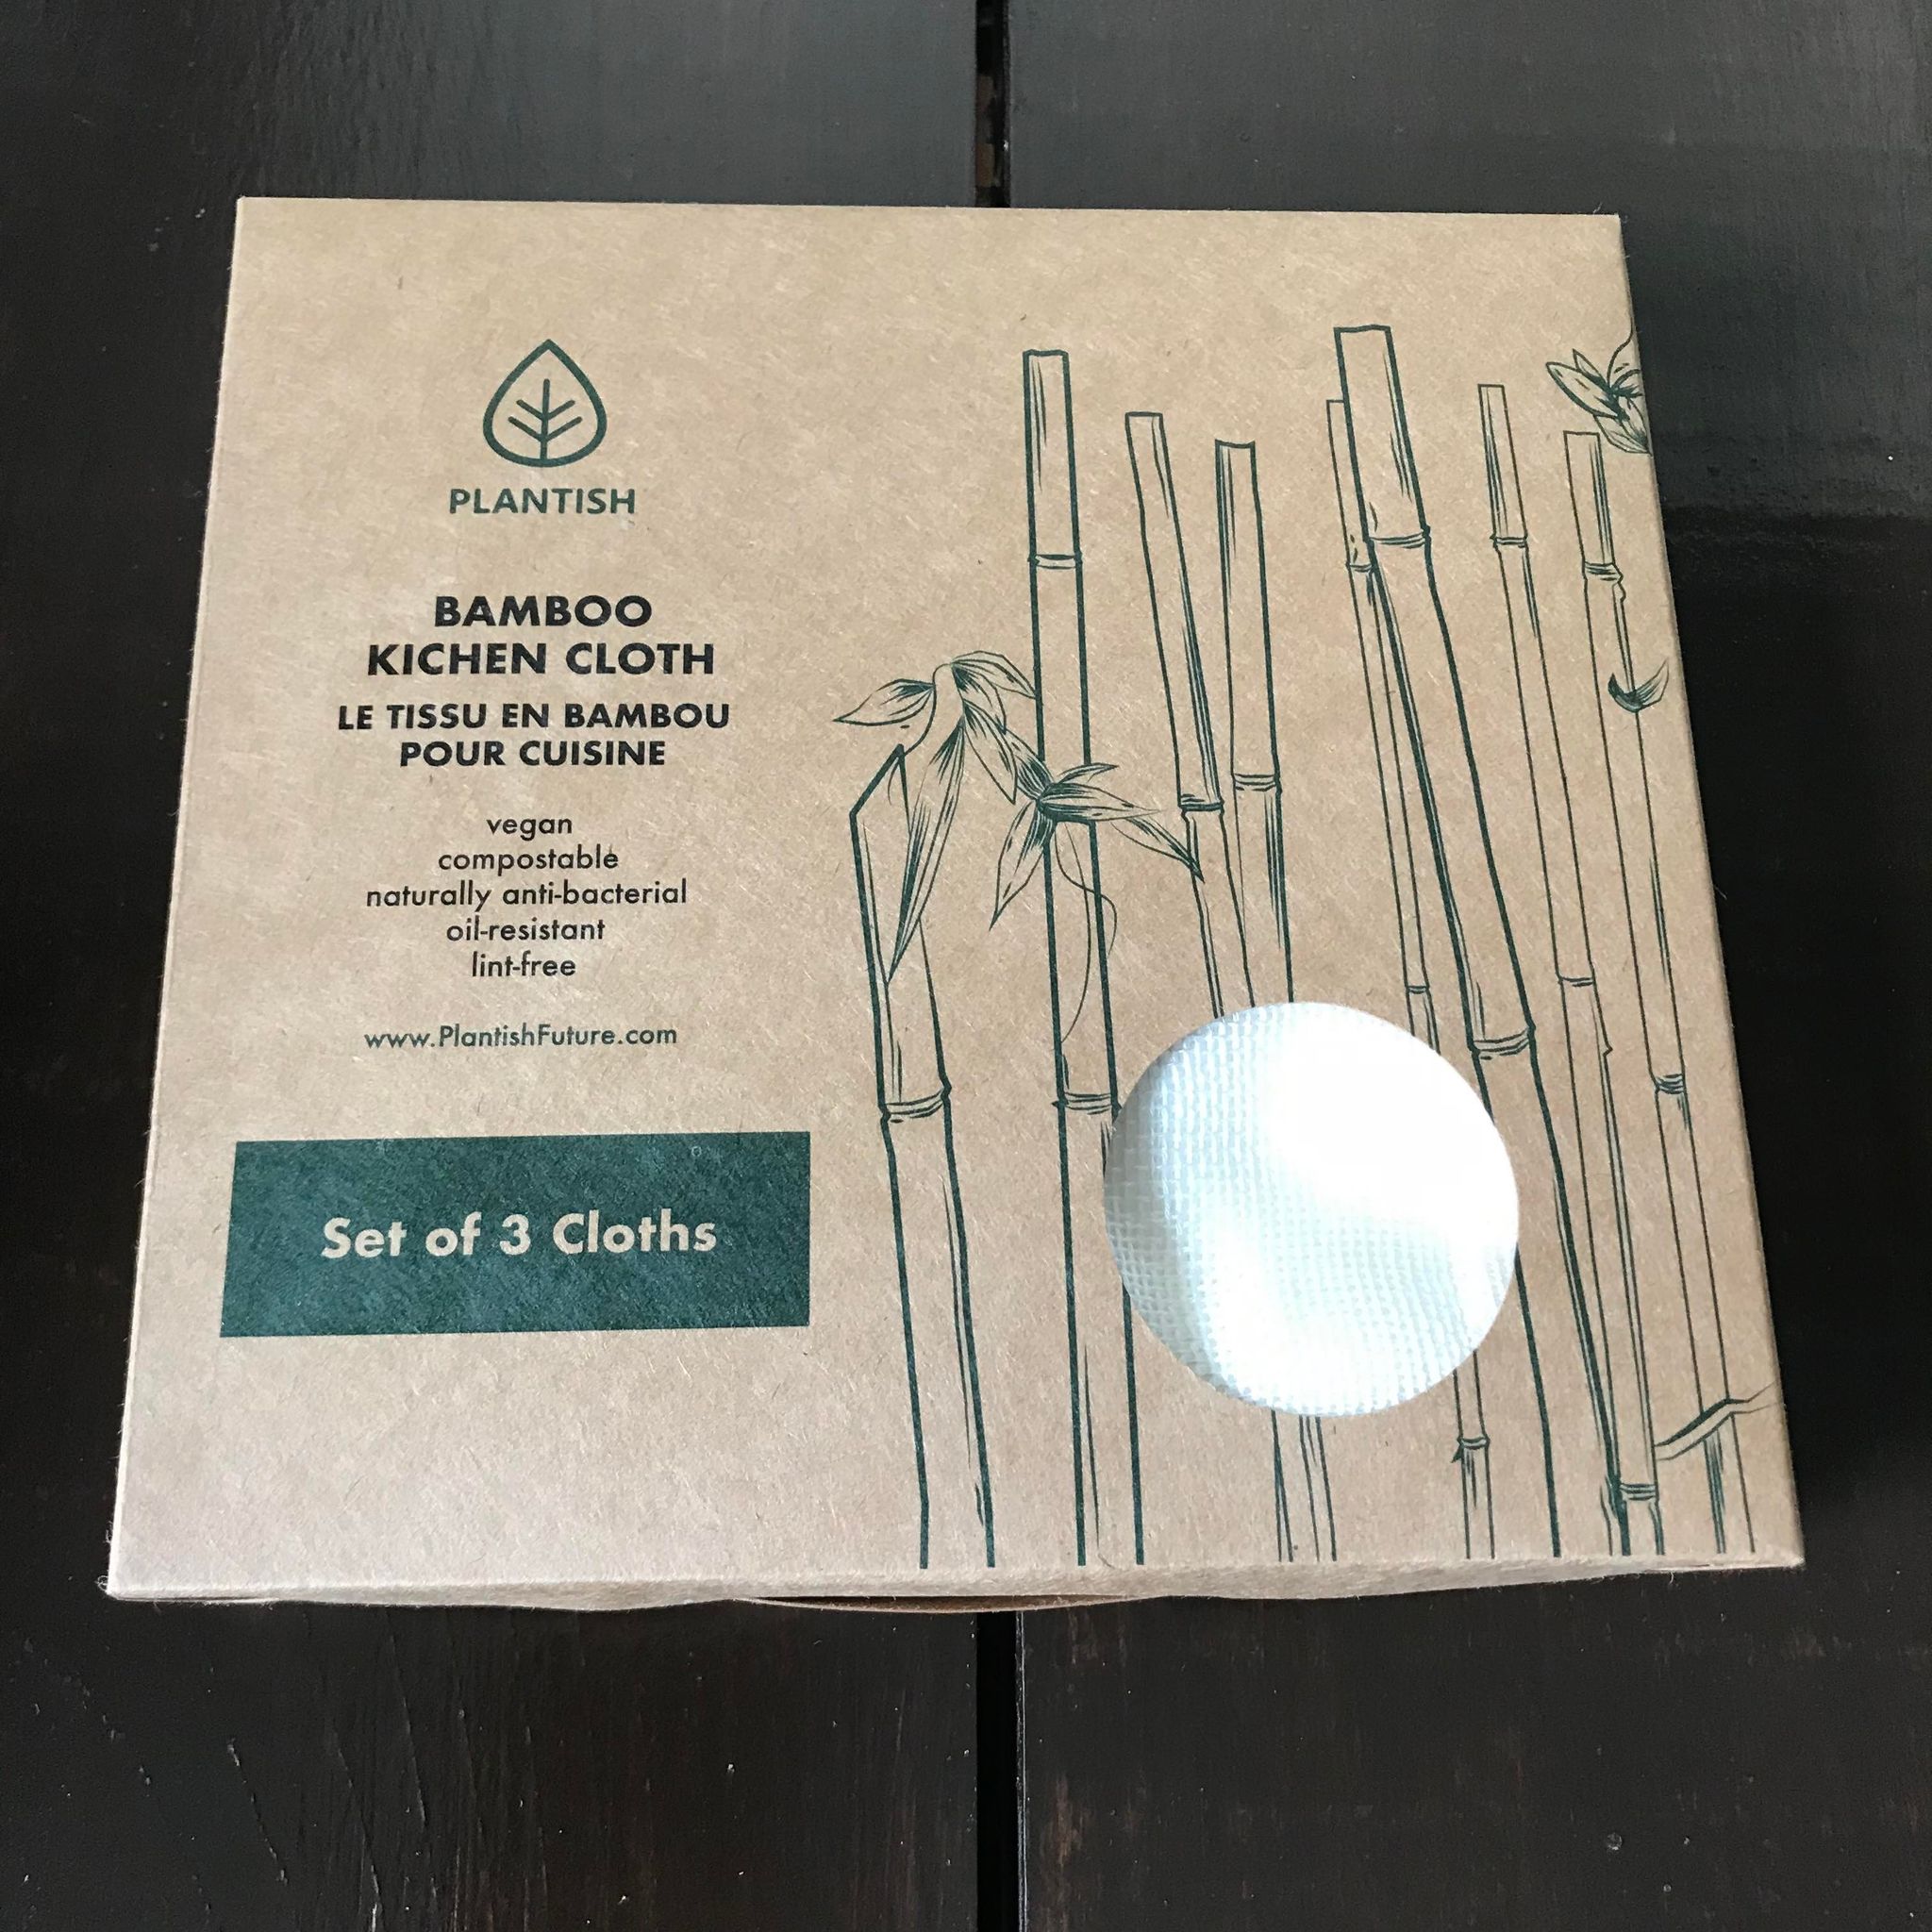 Plantish compostable, antibacterial, oil-resistant and lint-free set of 3 bamboo cloths in a box